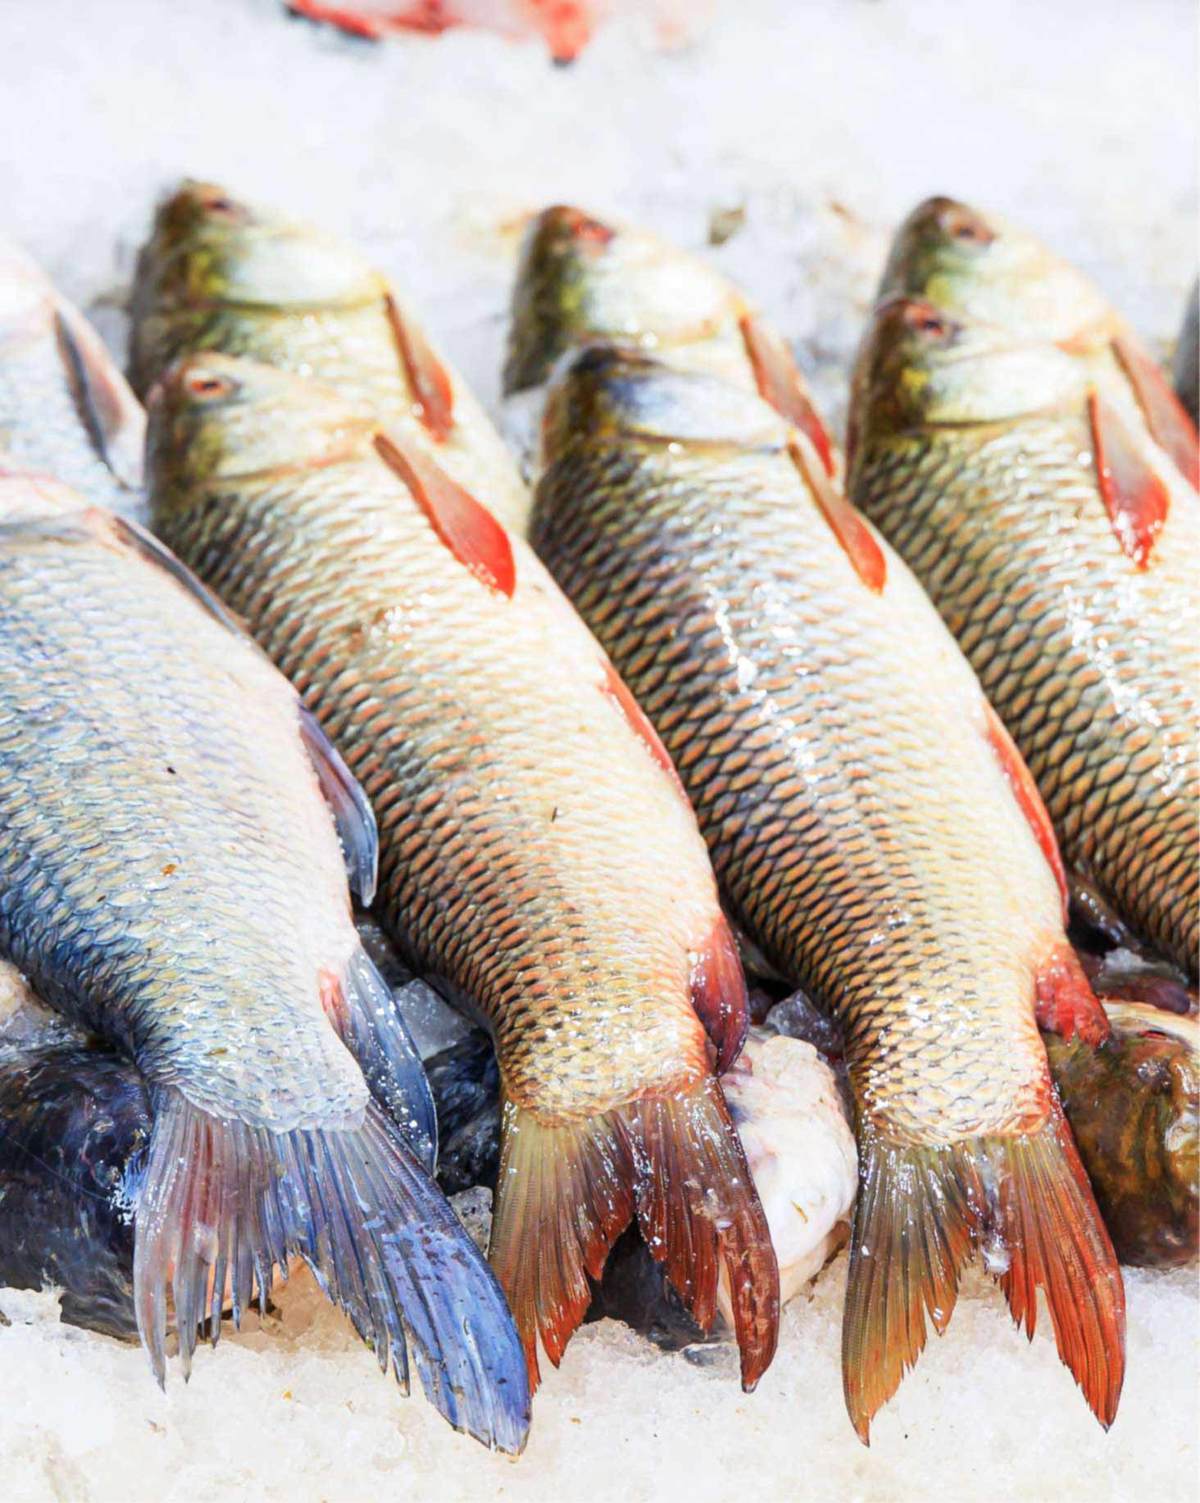 Photo of fish on ice in a fish market